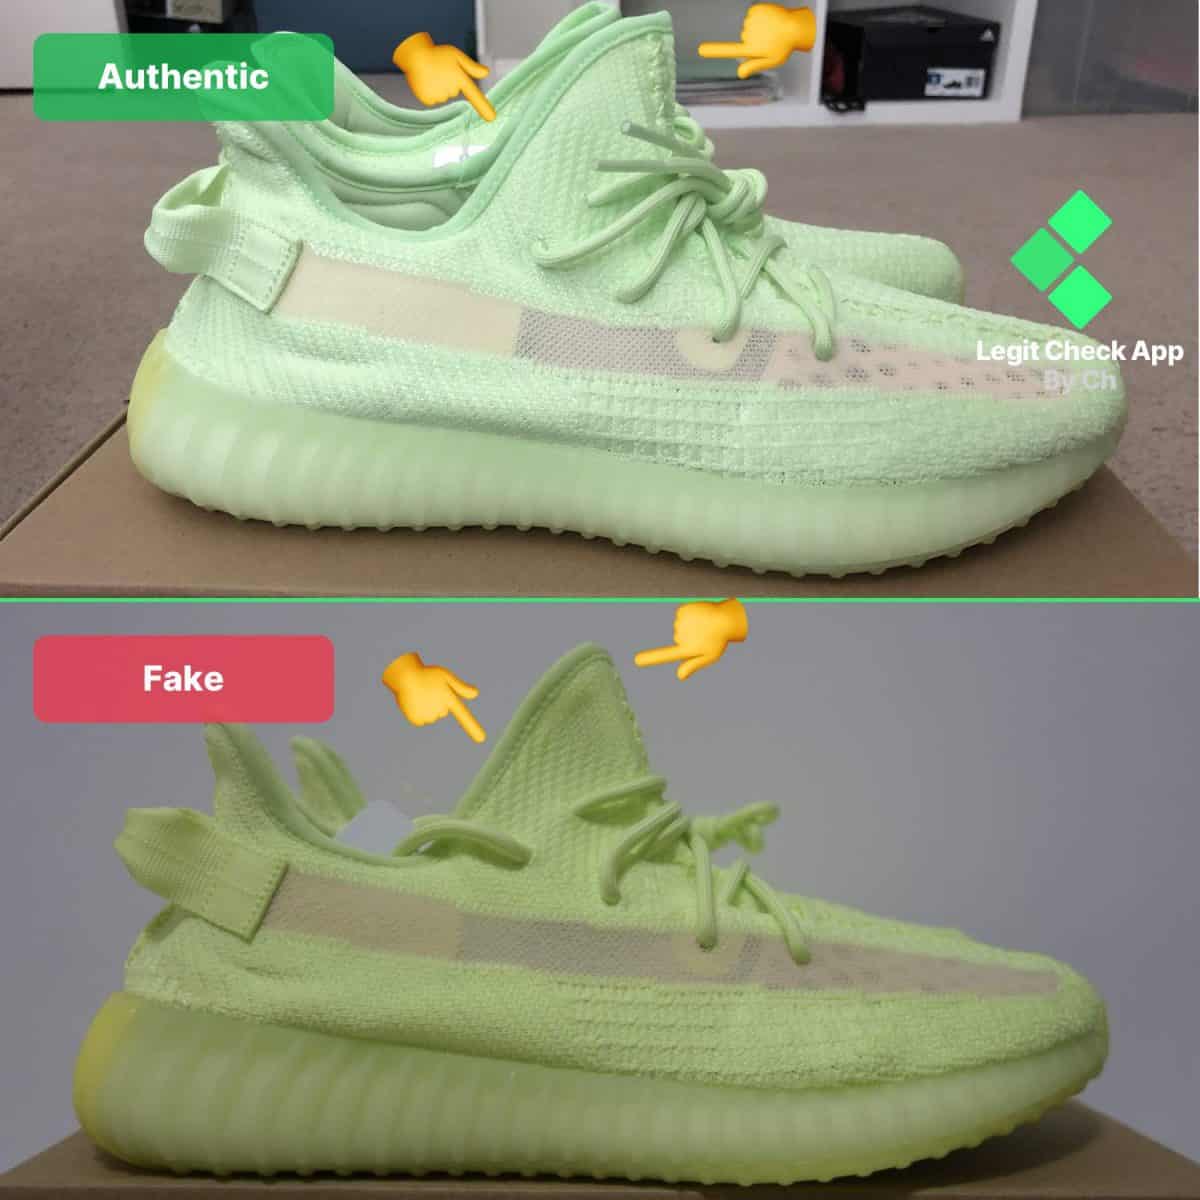 The Ultimate Fake vs Real Yeezy Boost 